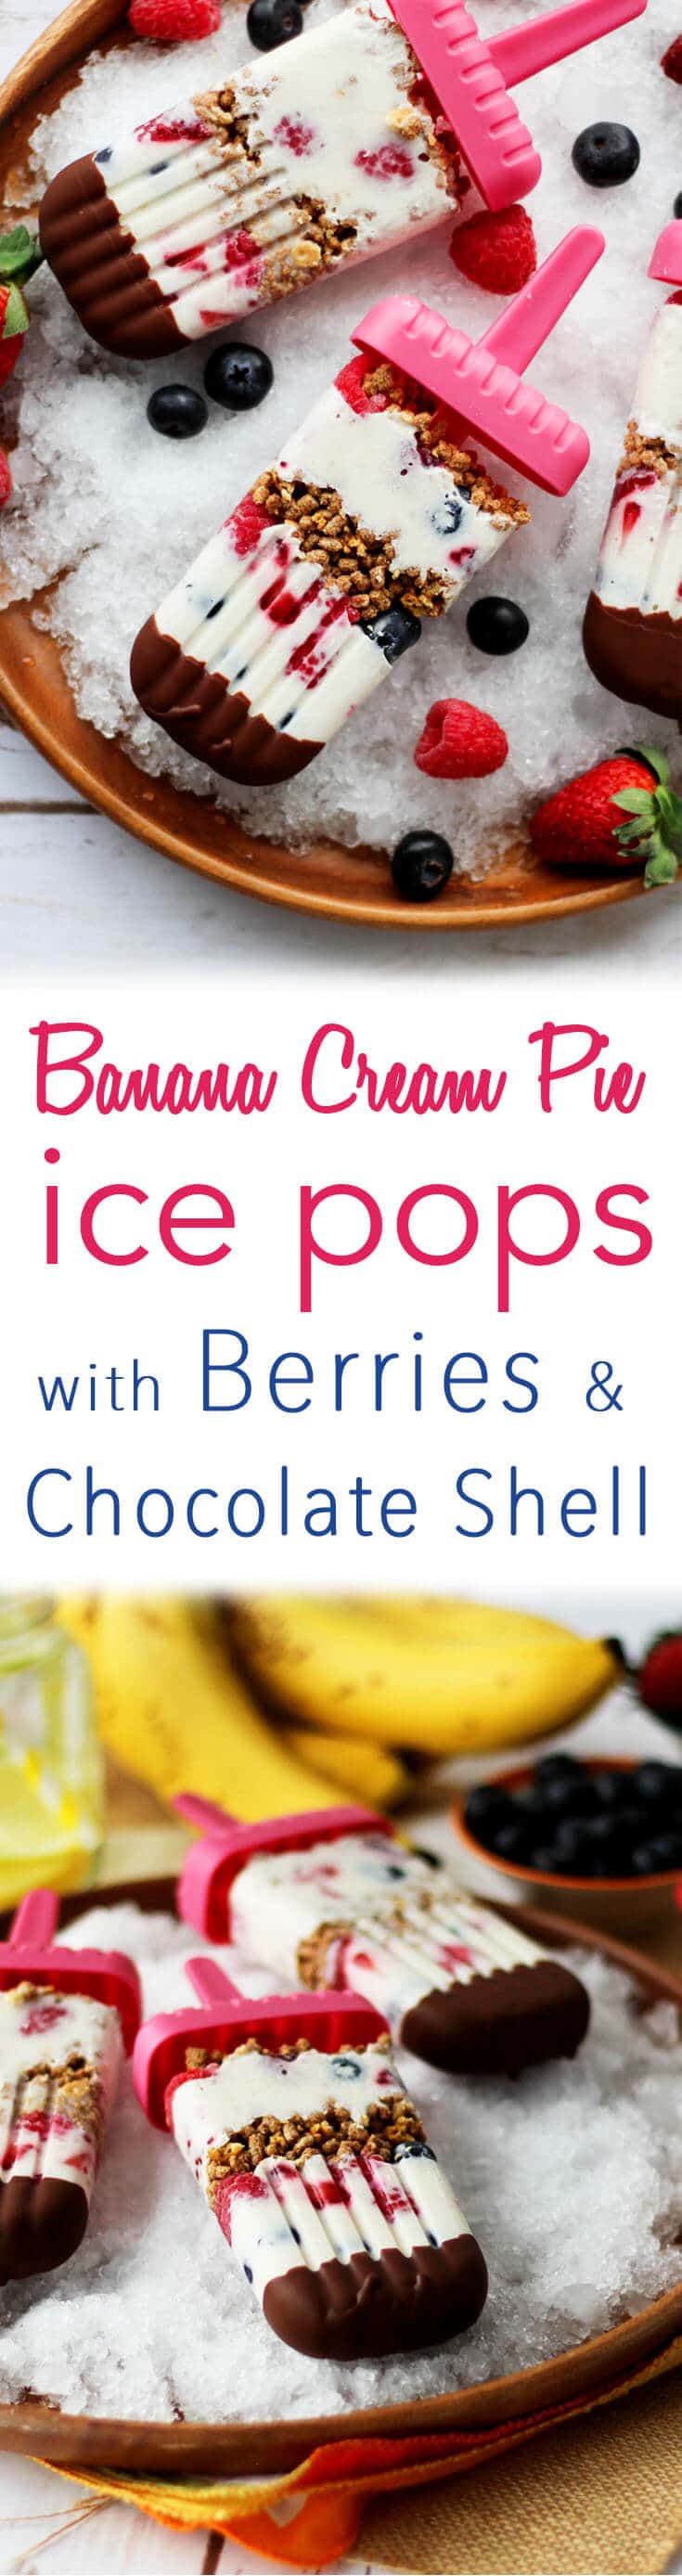 A pinterest image of a plate of popsicle with the text overlay  \"Banana Cream Pie Ice Pops with Berries & Chocolate Shell.\"